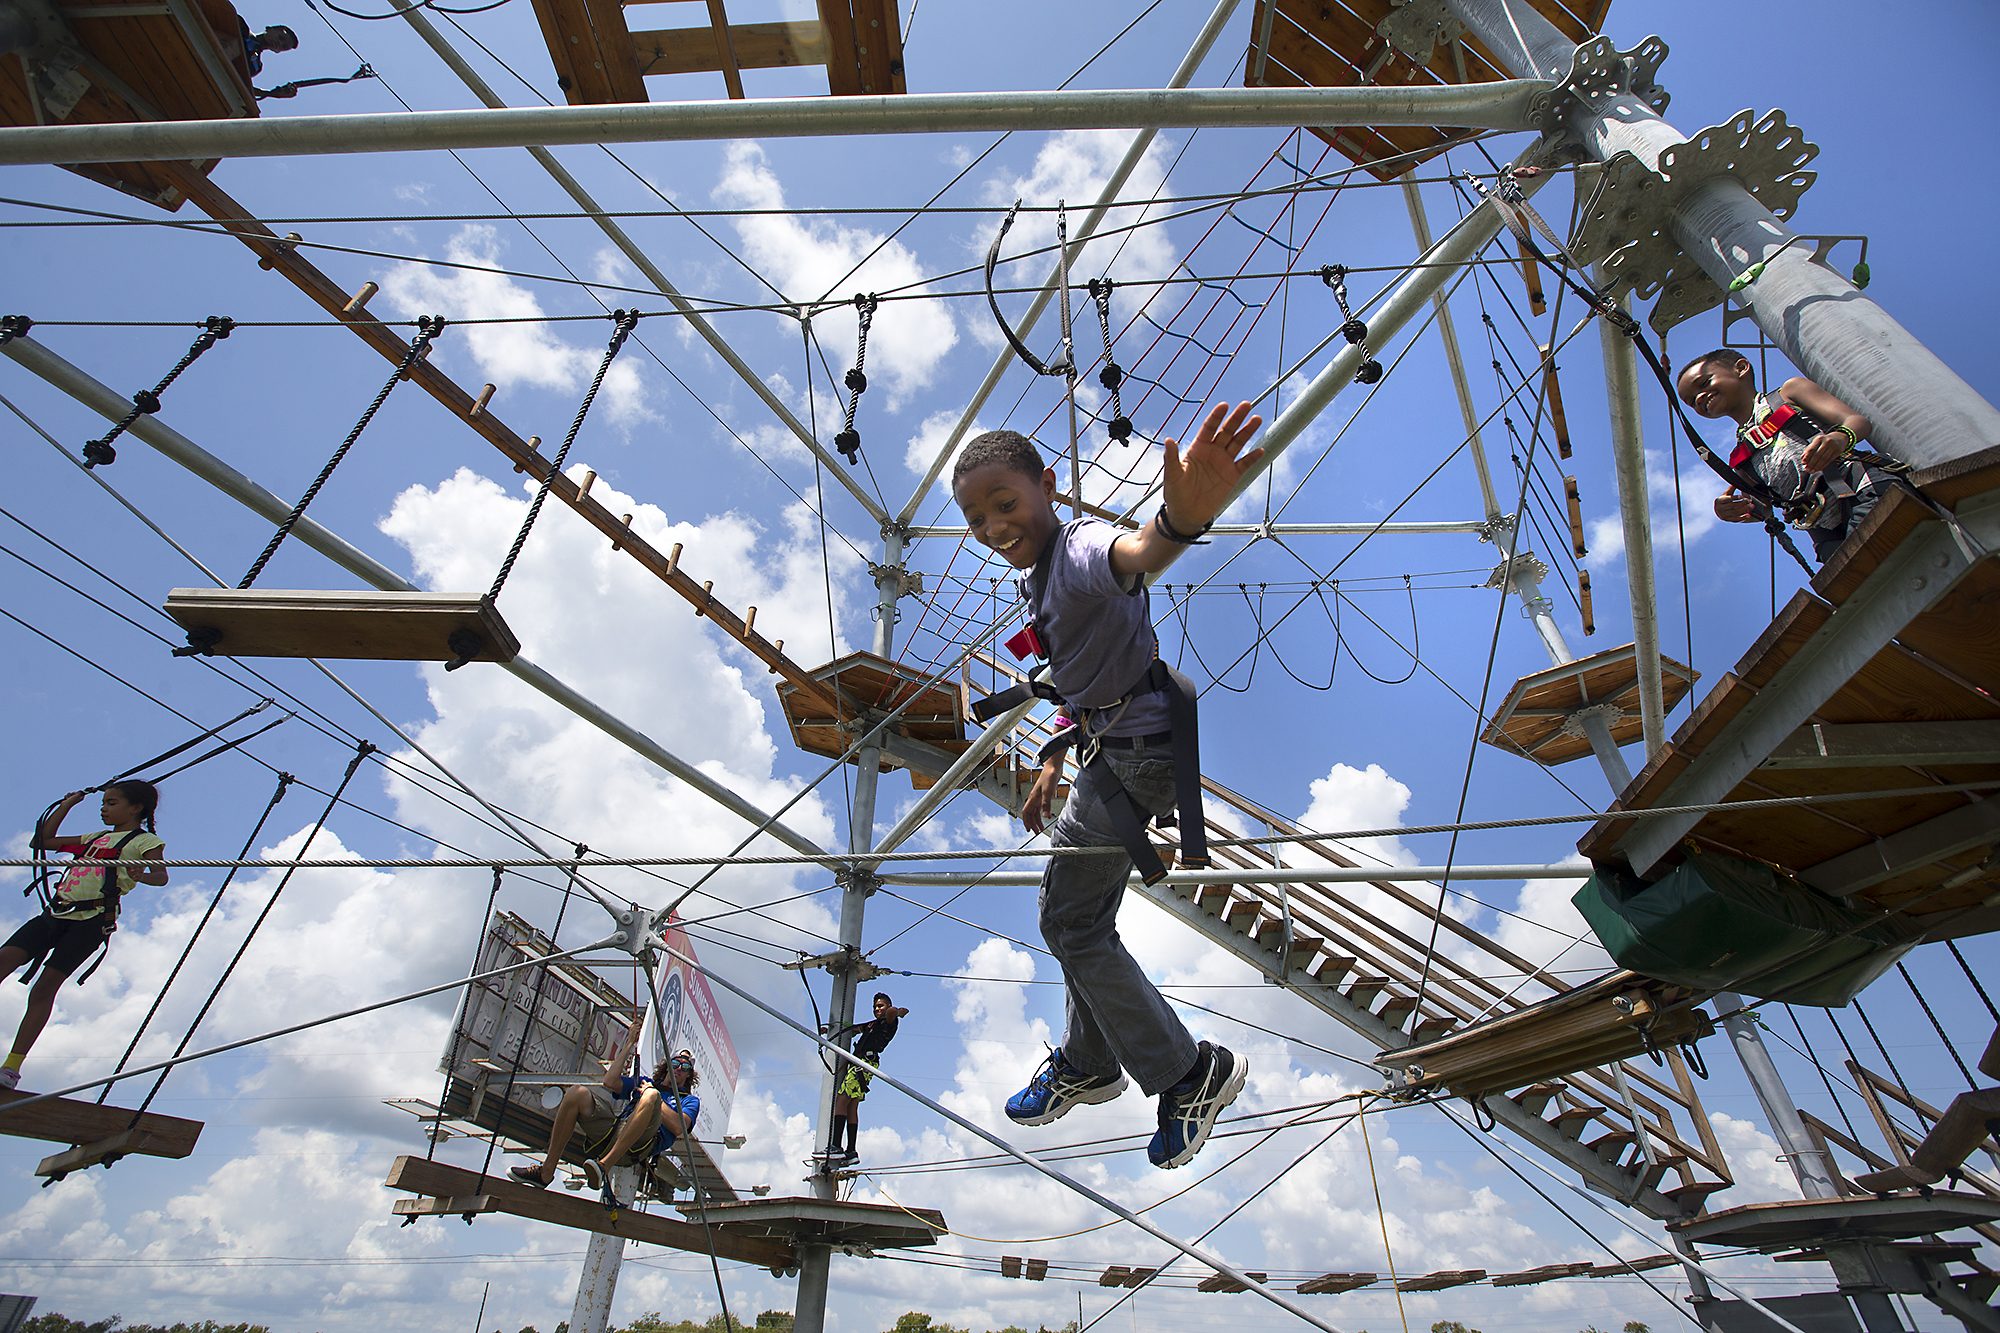 Ropes course offers adventurers a lesson in overcoming obstacles - Houston Chronicle